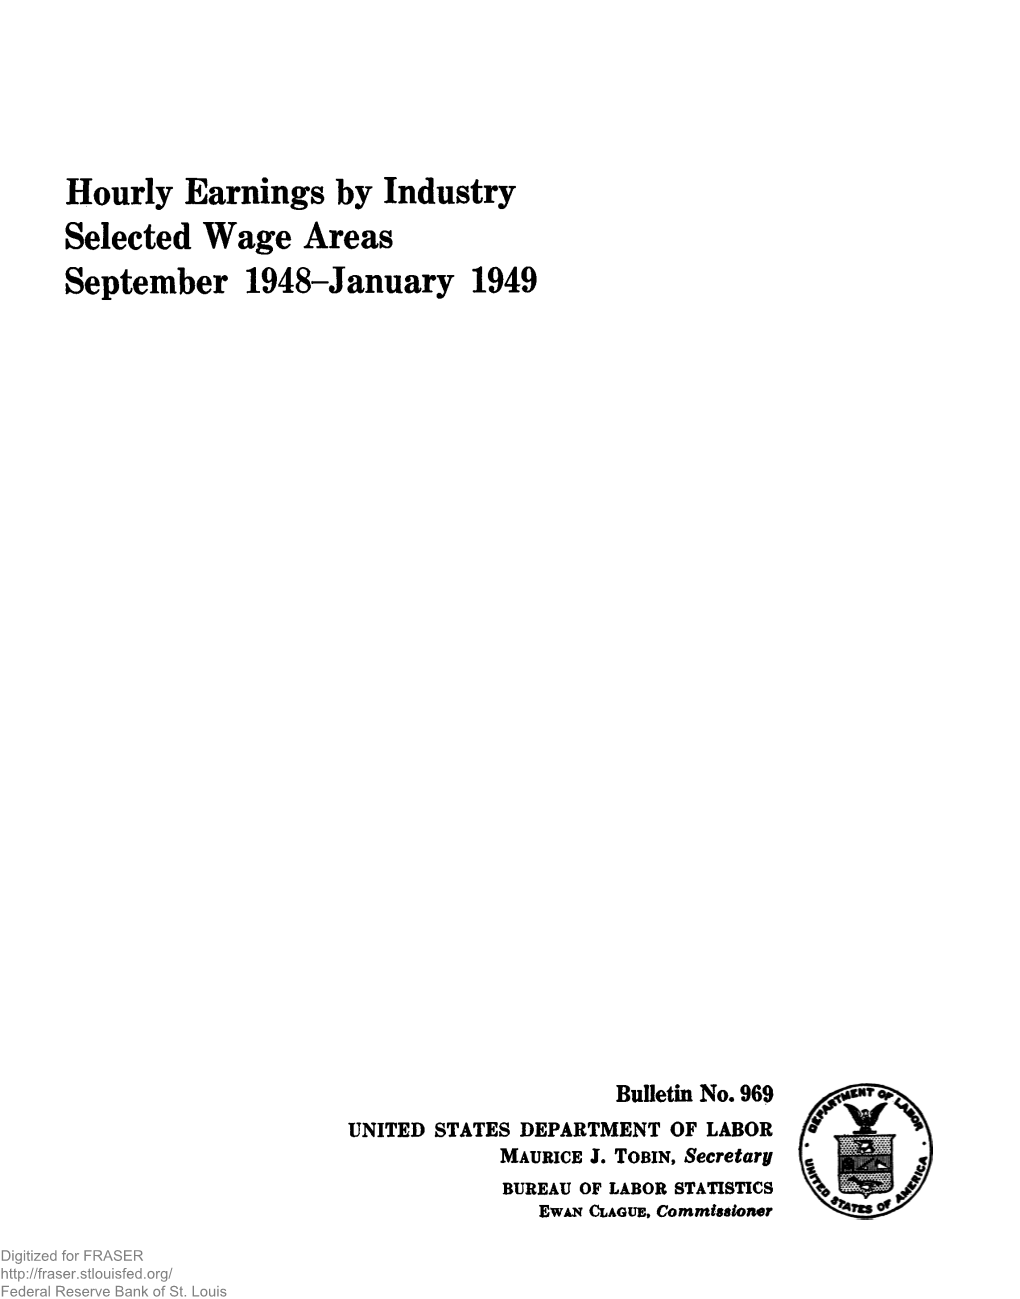 Hourly Earnings by Industry, Selected Wage Areas, September 1948-January 1949